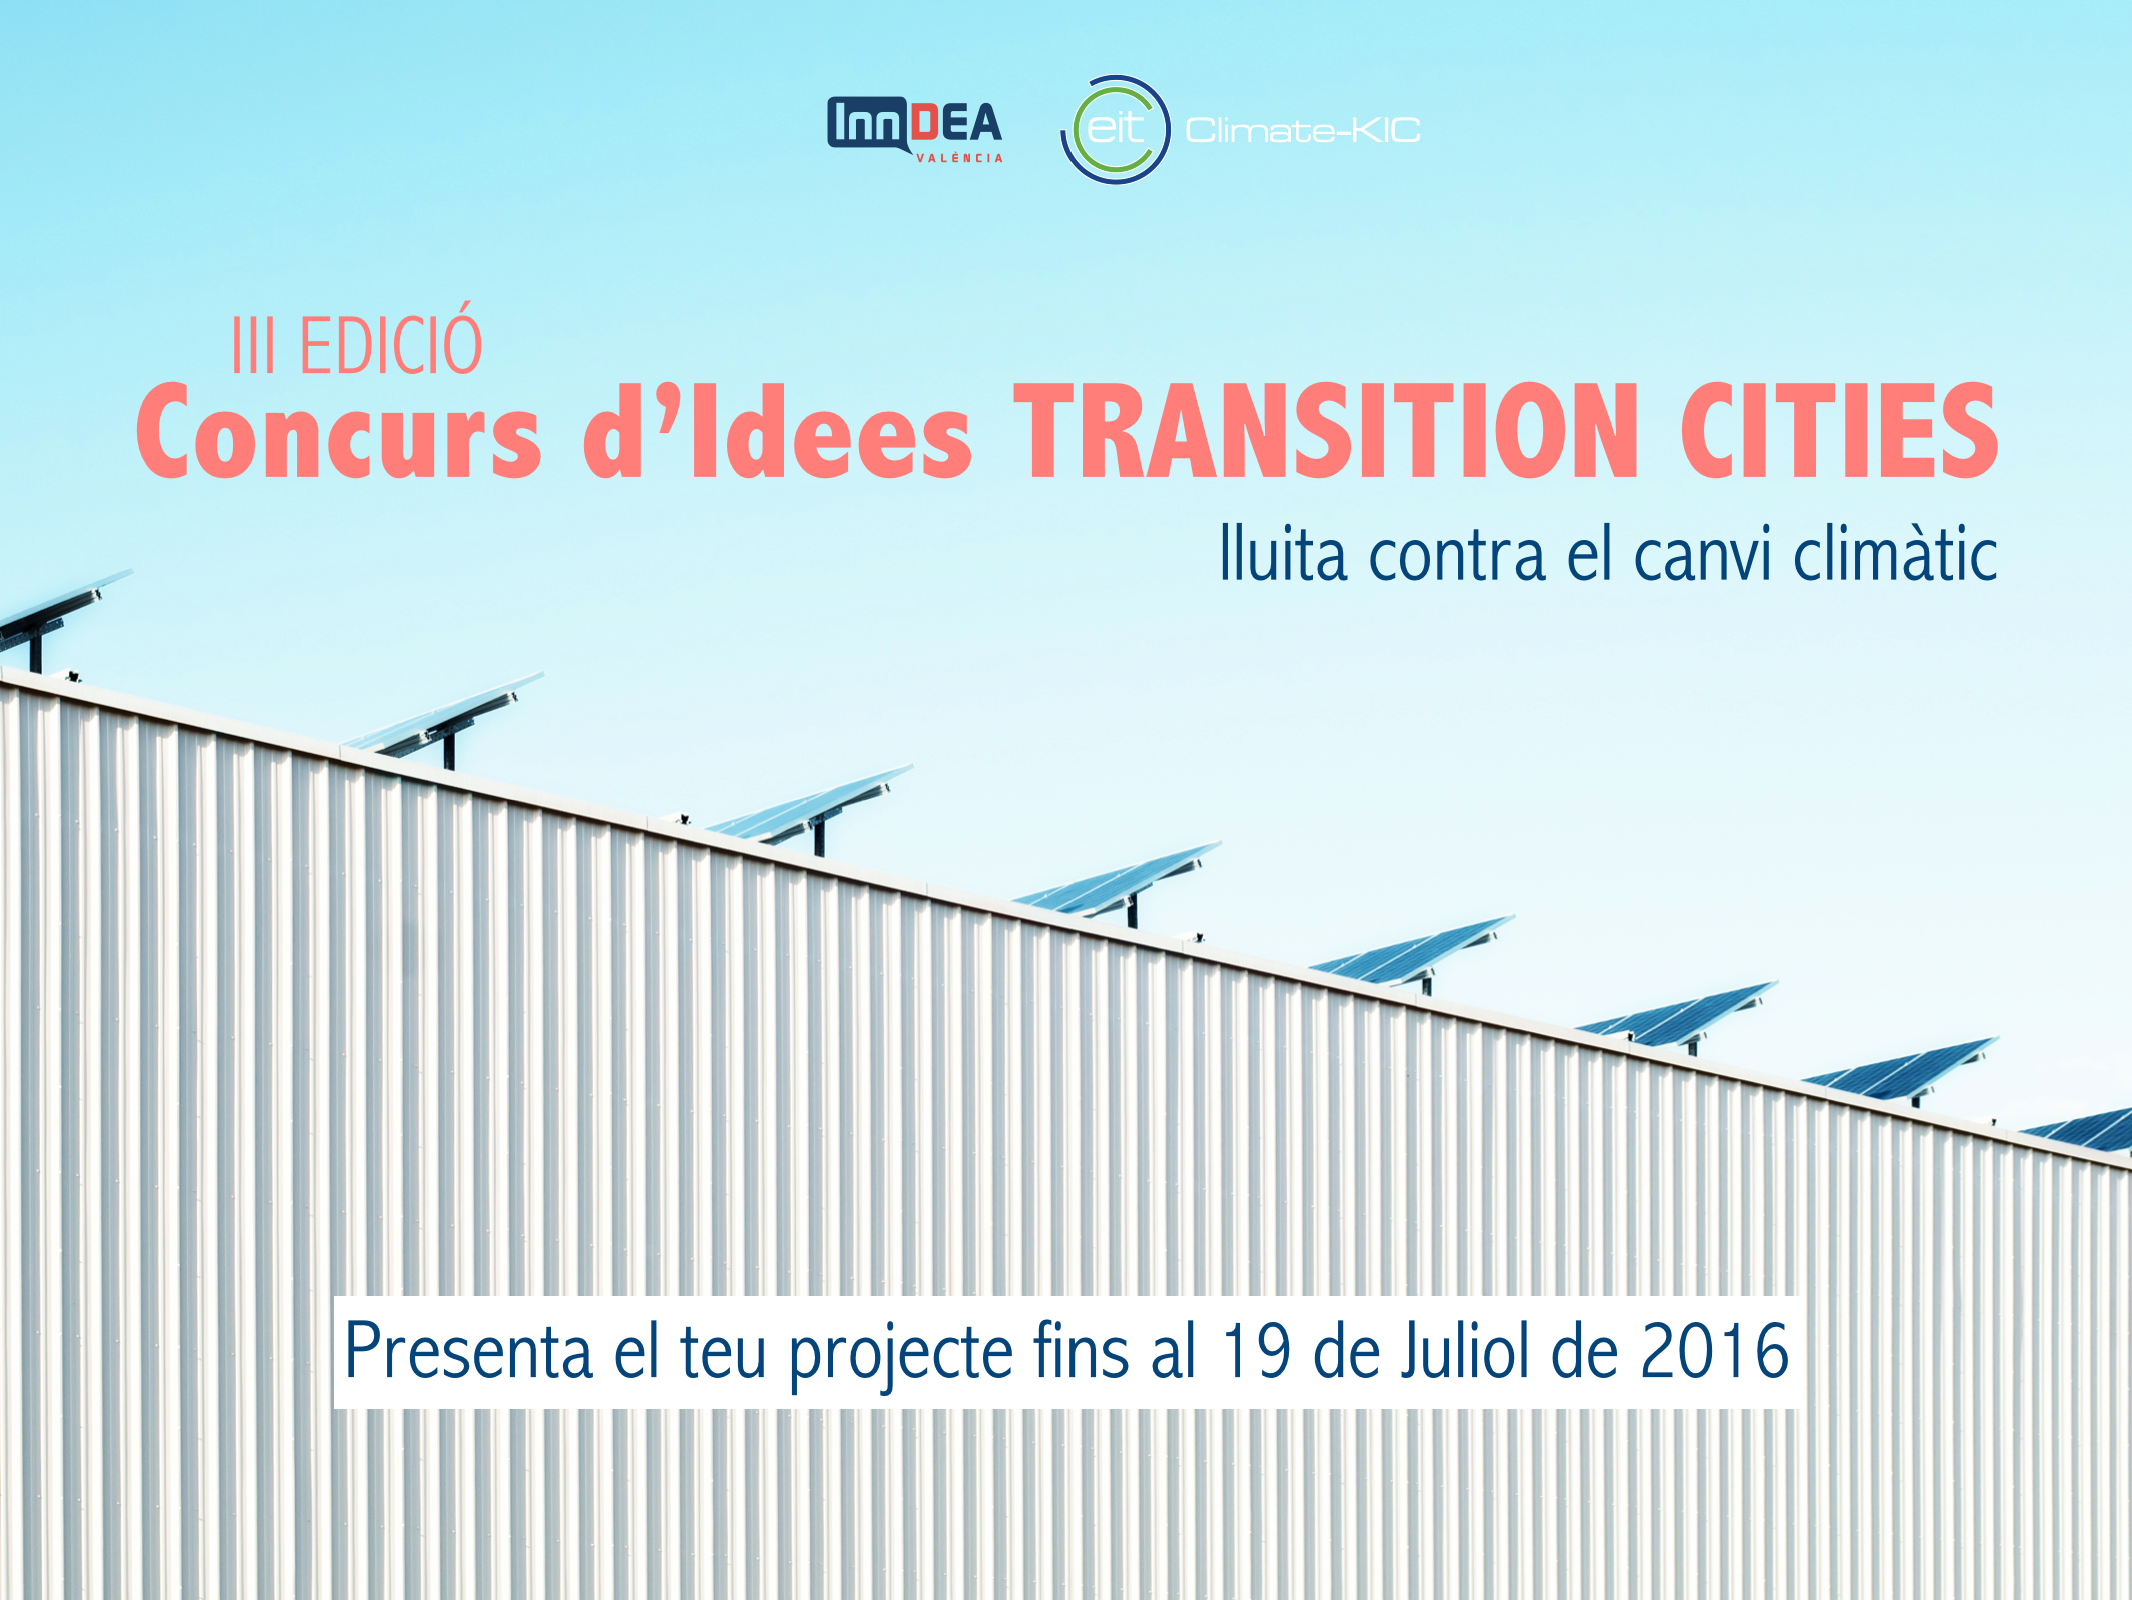 Transition Cities